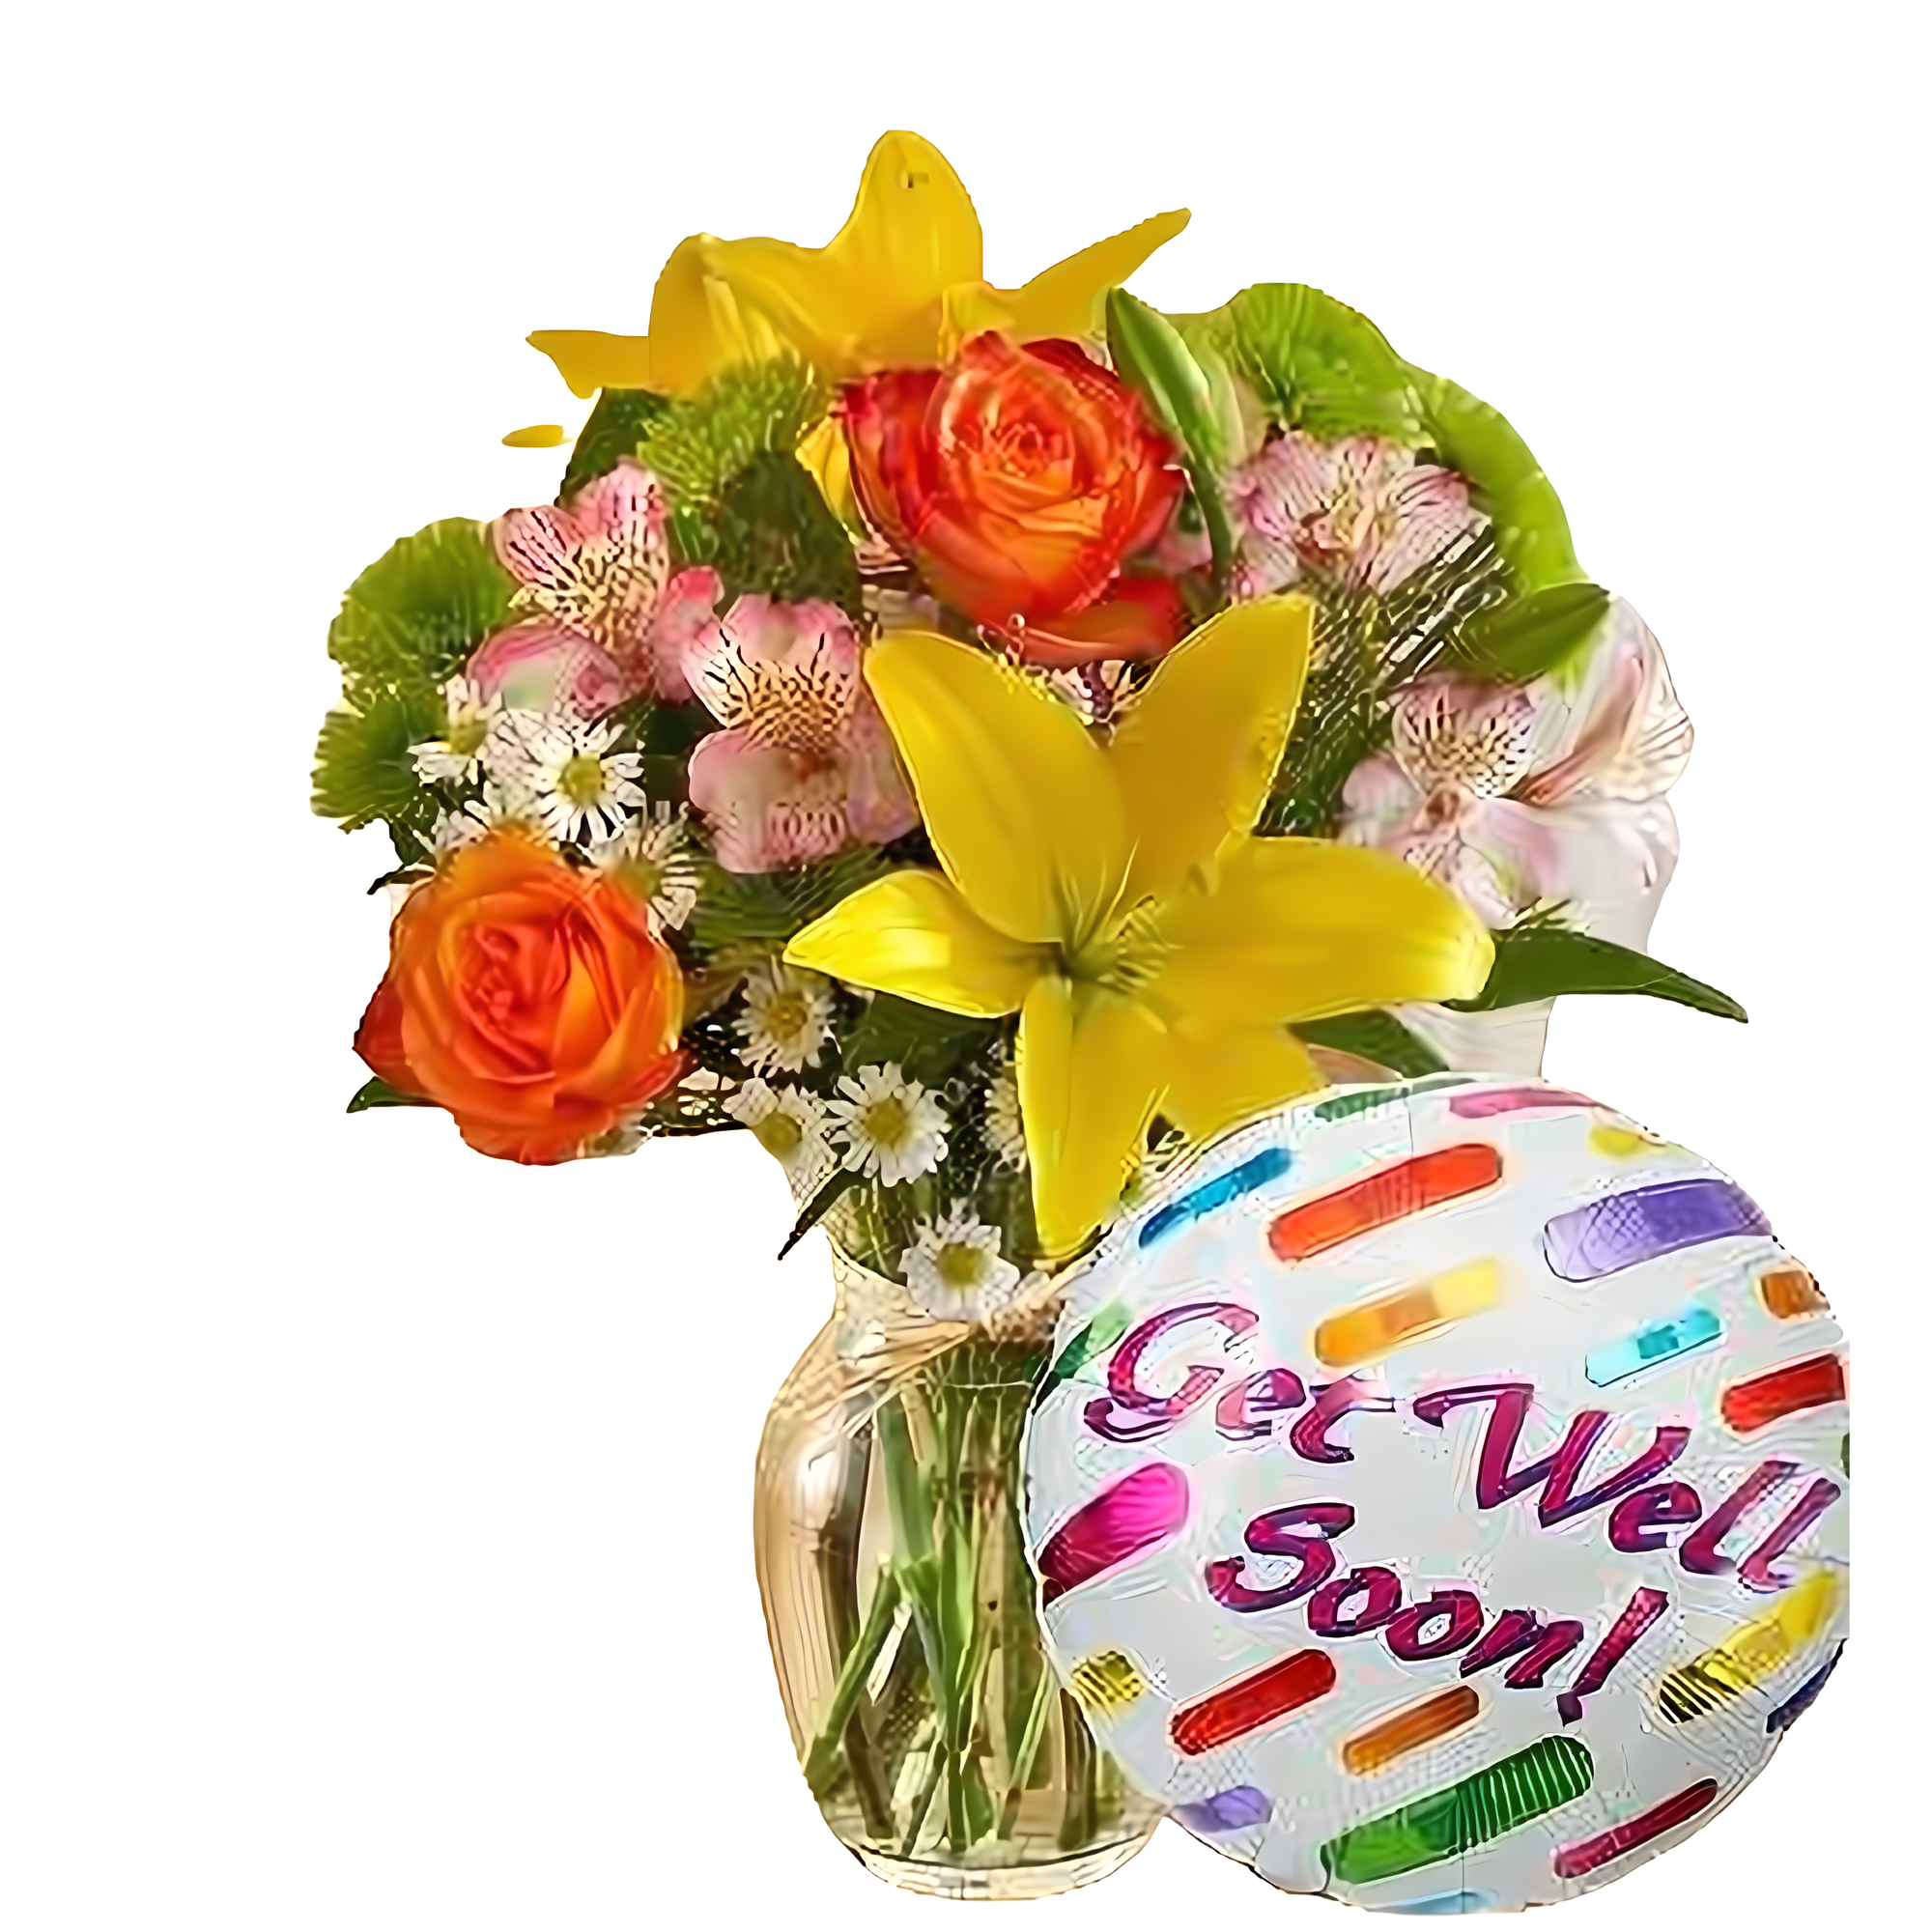 Fields of the World w/ Get Well Balloon - Occasions > Get Well